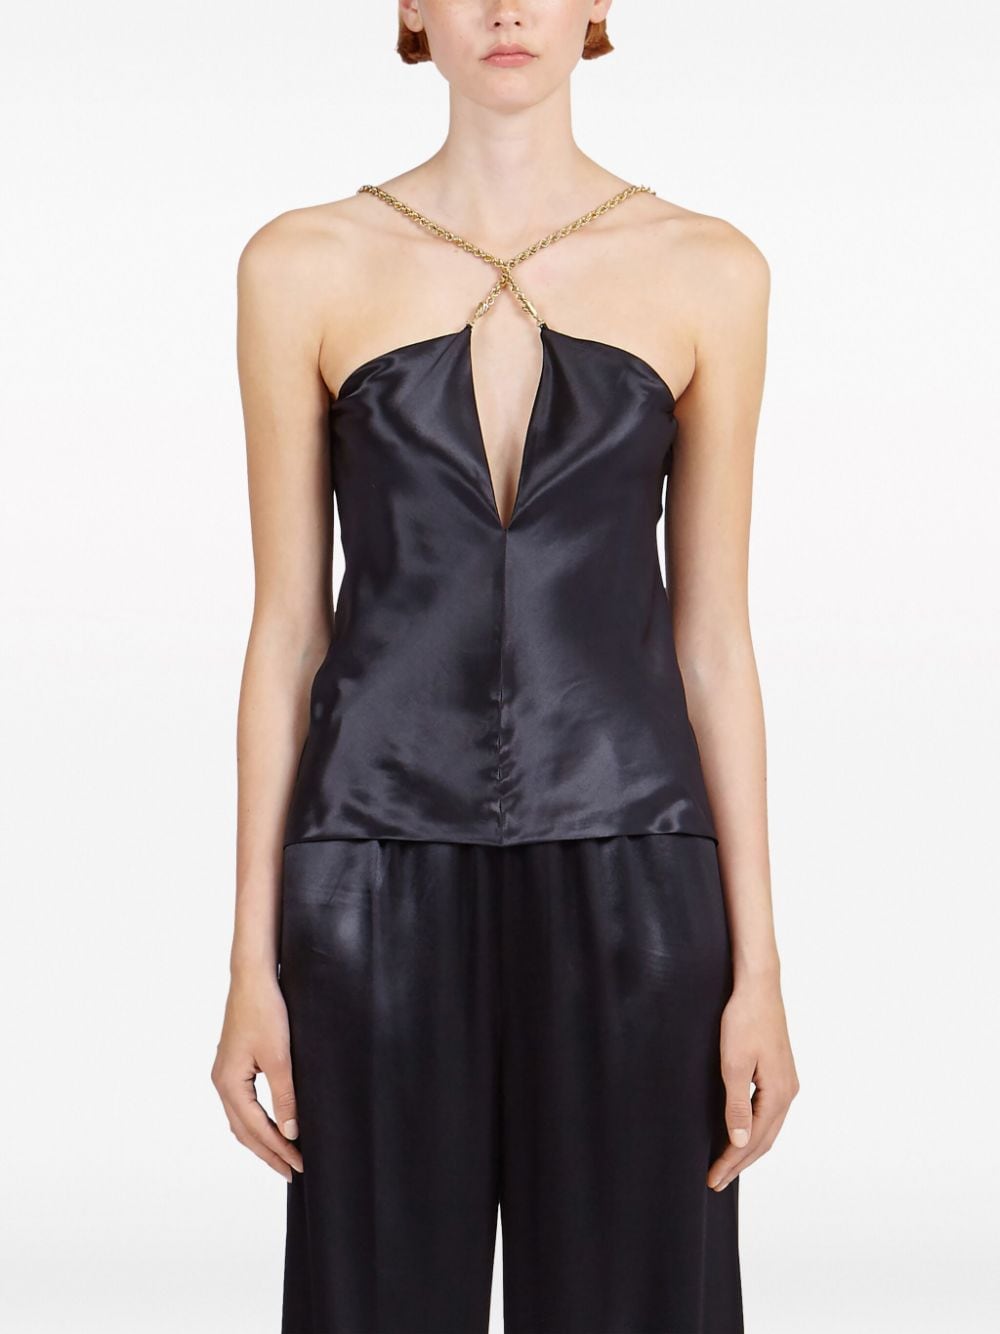 Satin Sleeveless Top with Cut-Out Detailing and Crossover Neck for Women